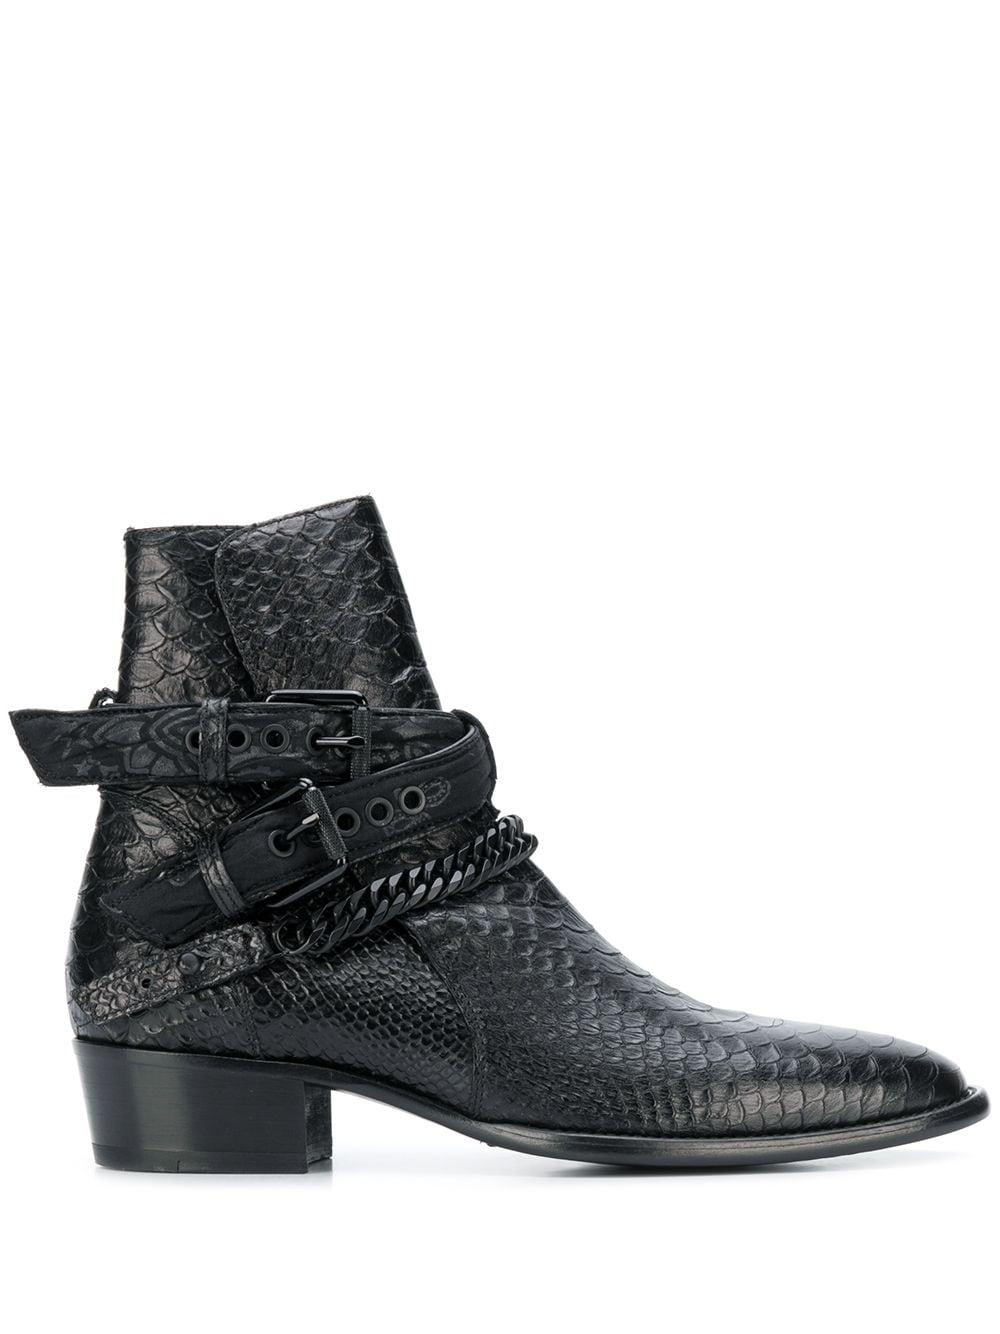 Amiri Leather Python-stamped Jodhpur Boots in Black for Men | Lyst